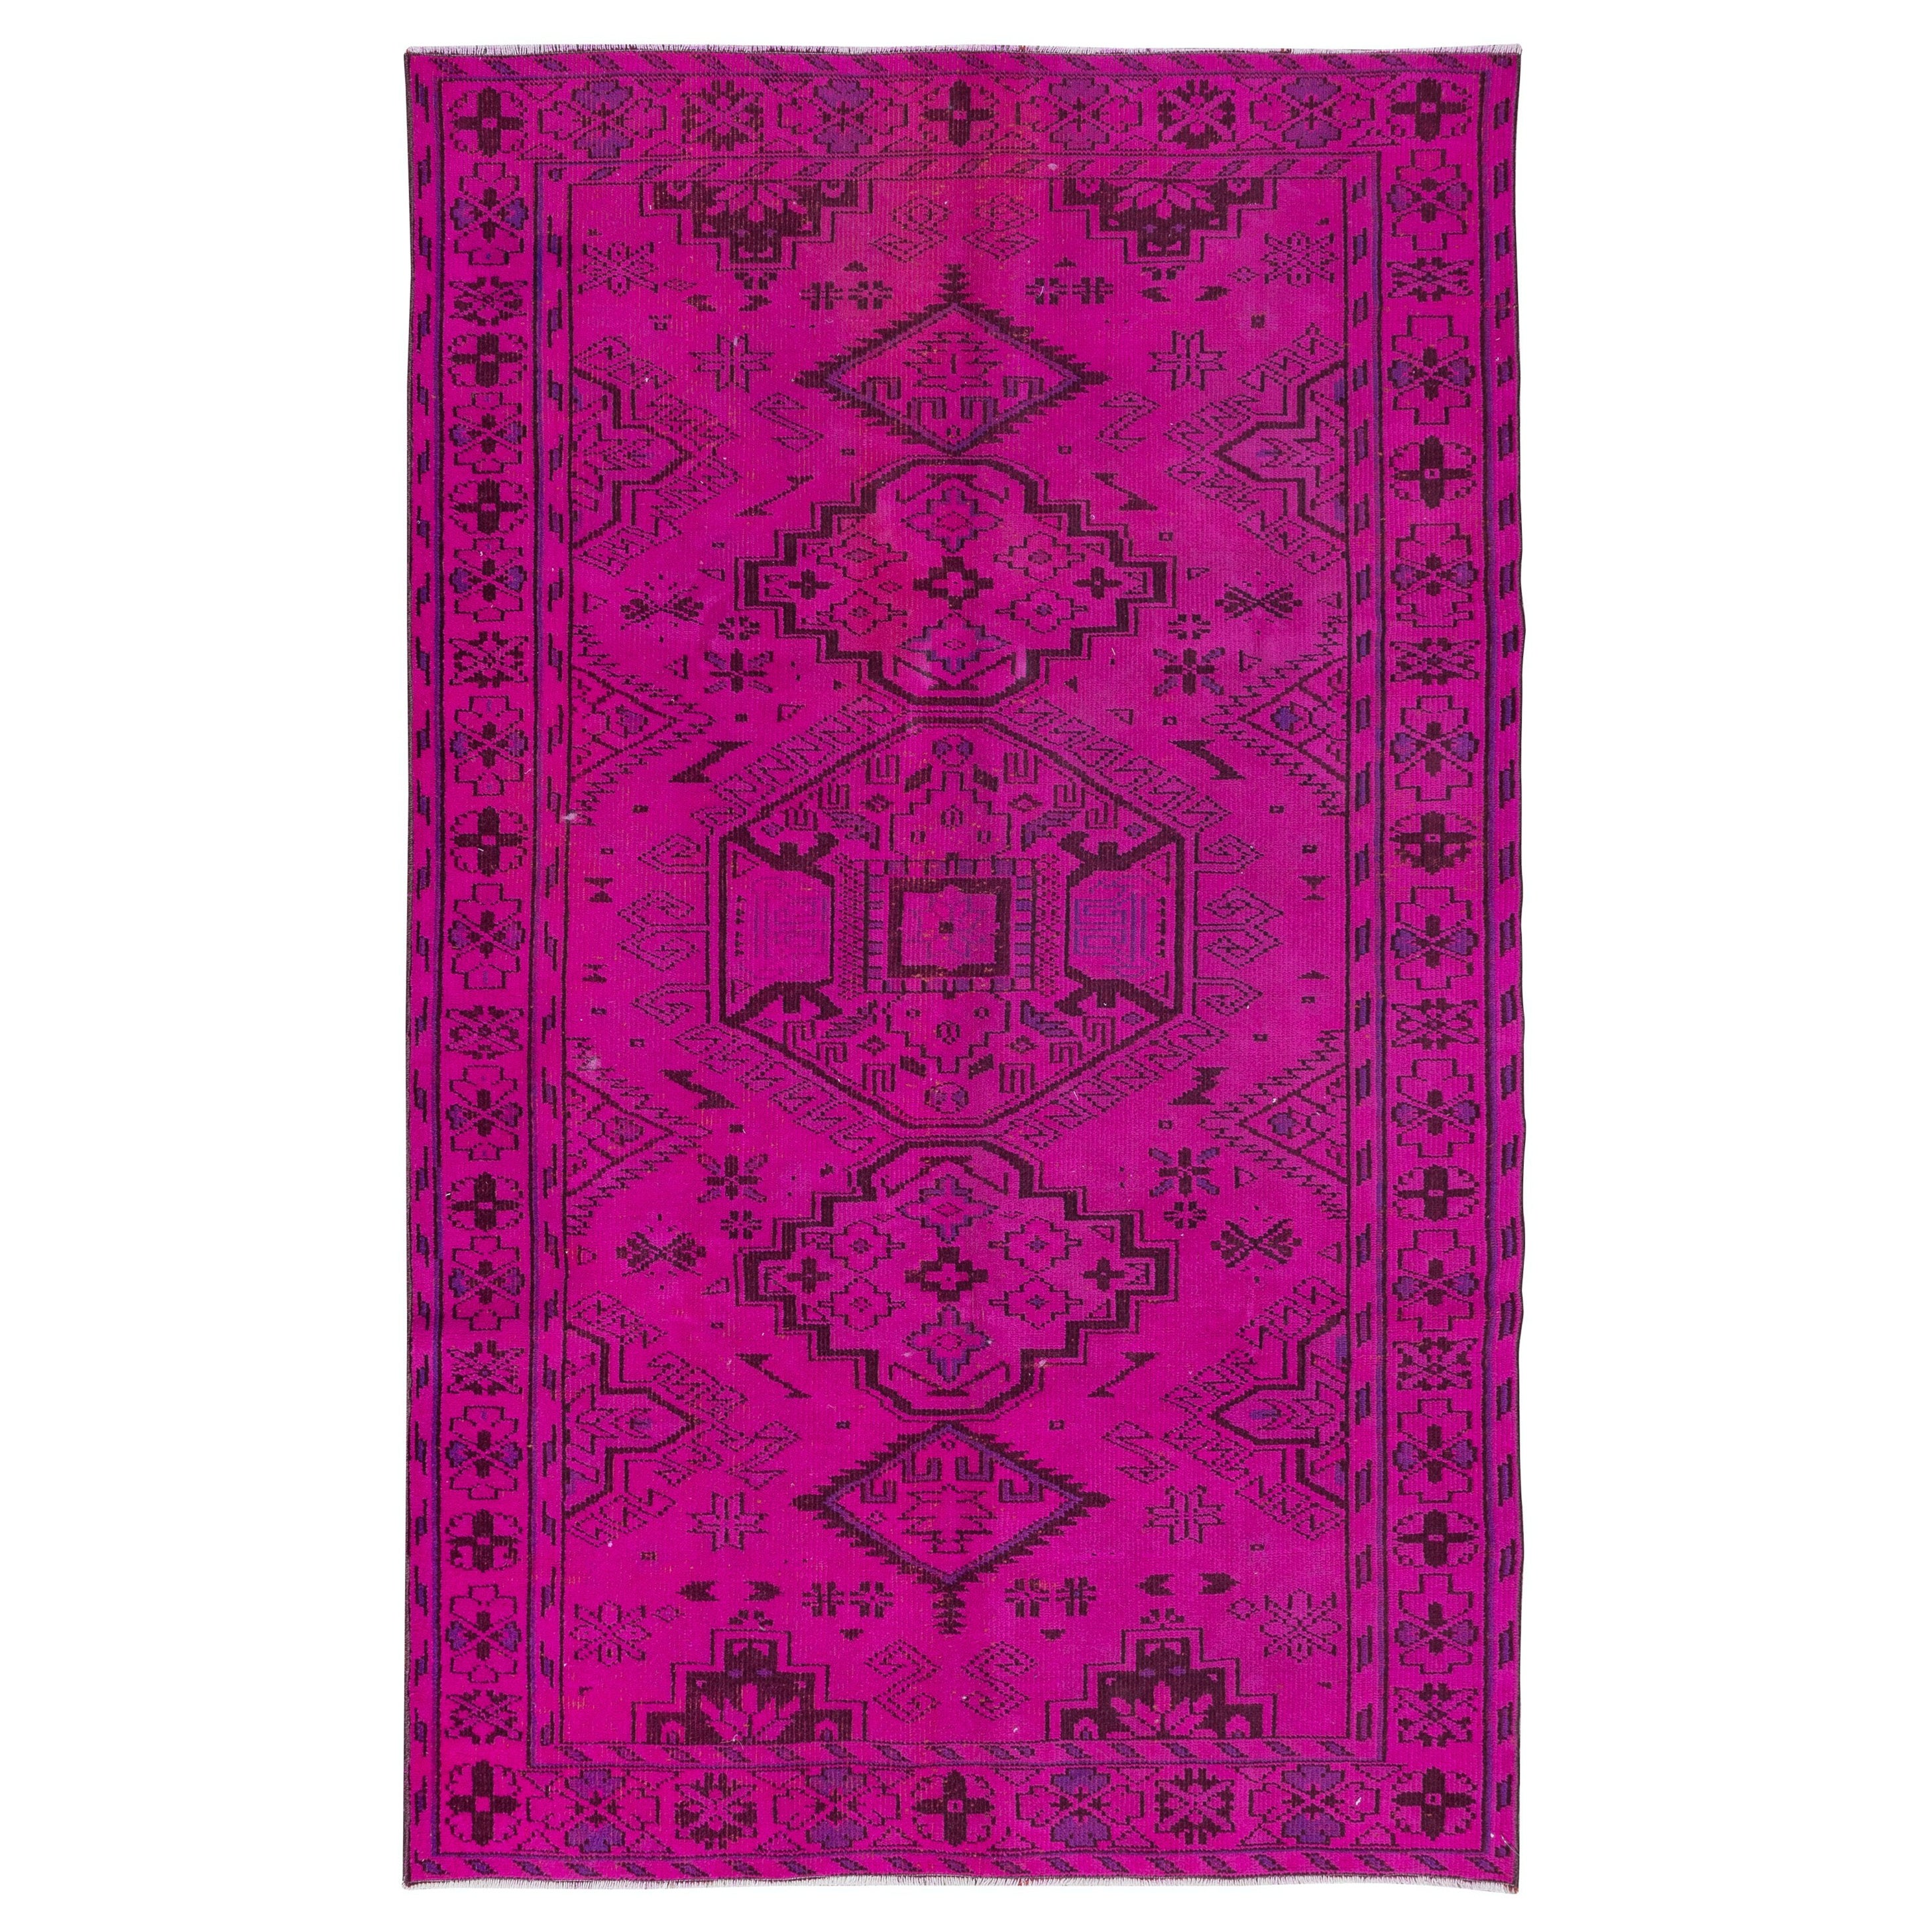 5.5x8.6 Ft Elegant Modern Handmade Turkish Area Rug with Medallions in Hot Pink